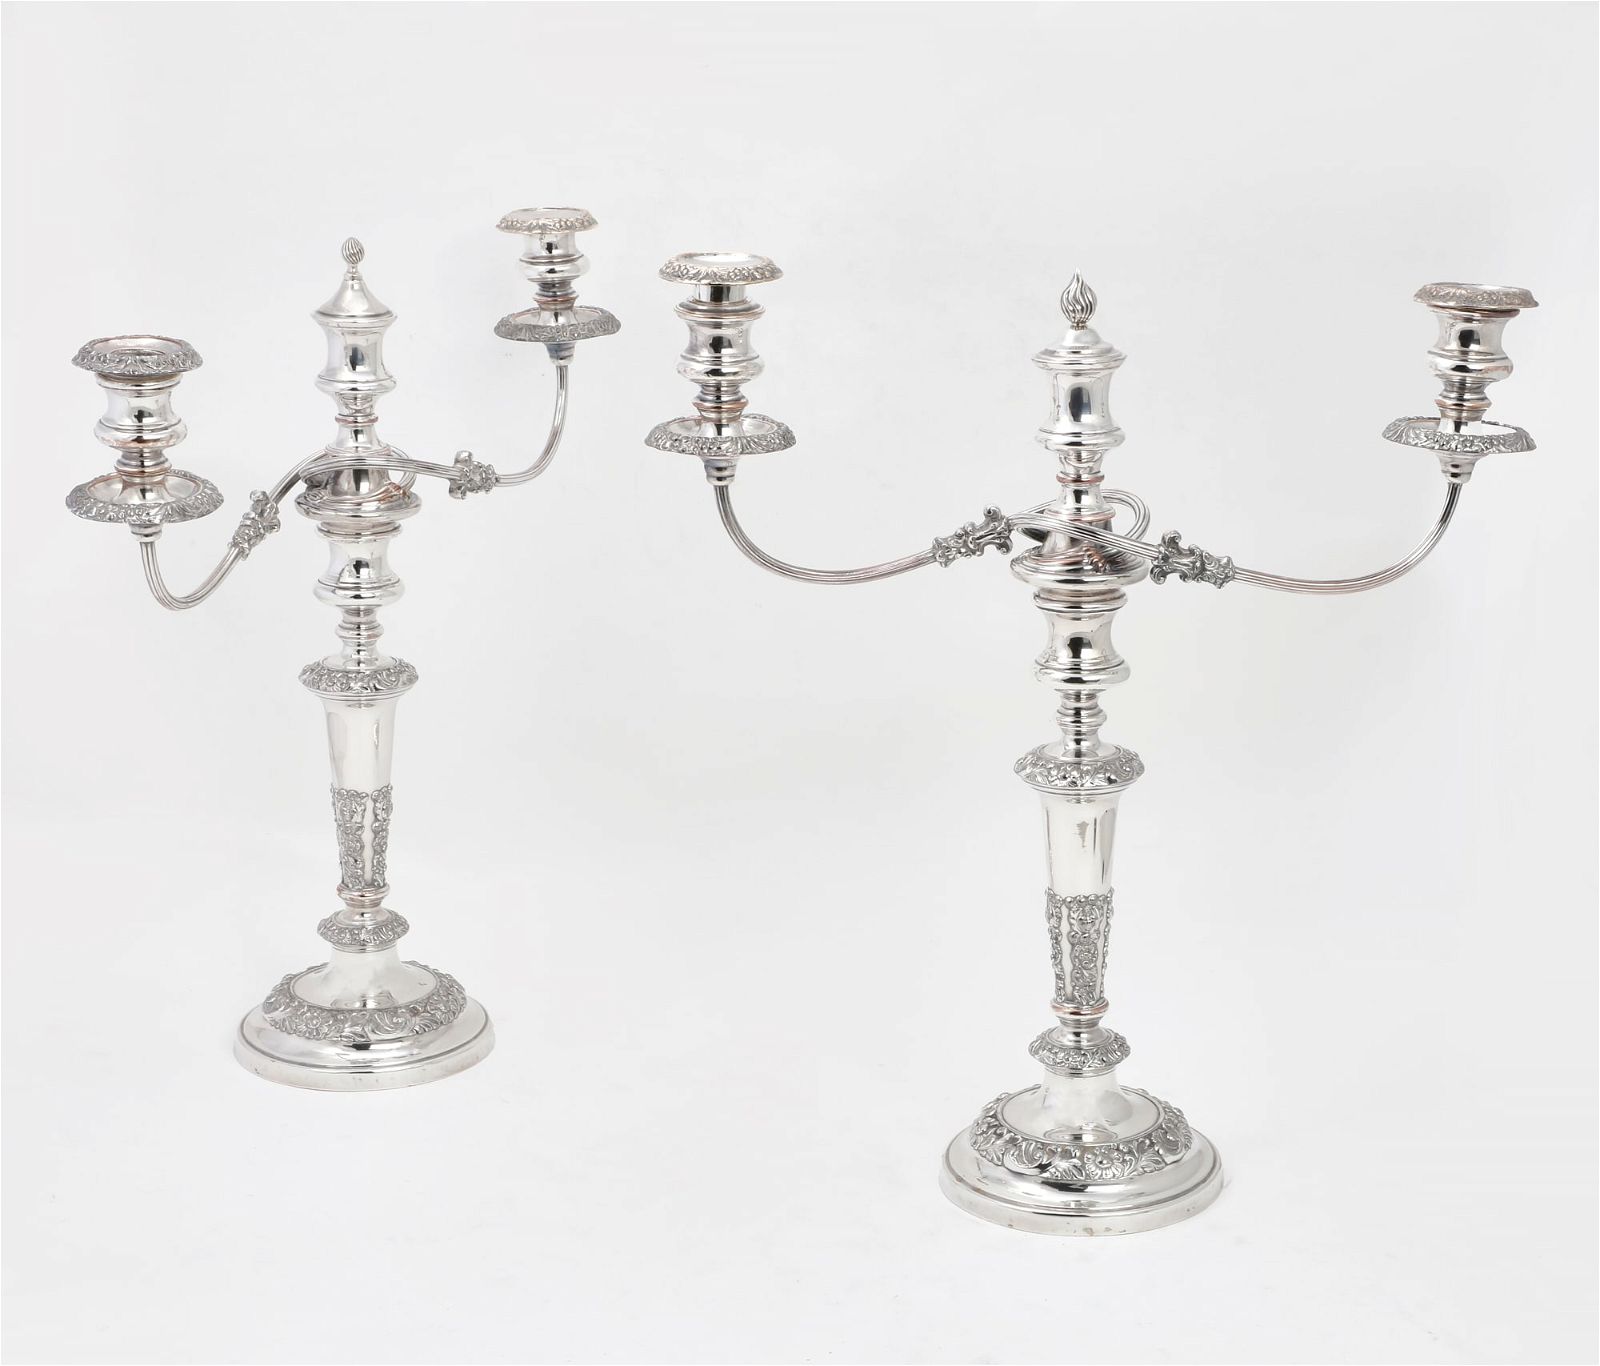 A PAIR OF ENGLISH SILVERPLATE CANDELABRAA 2fb32fb